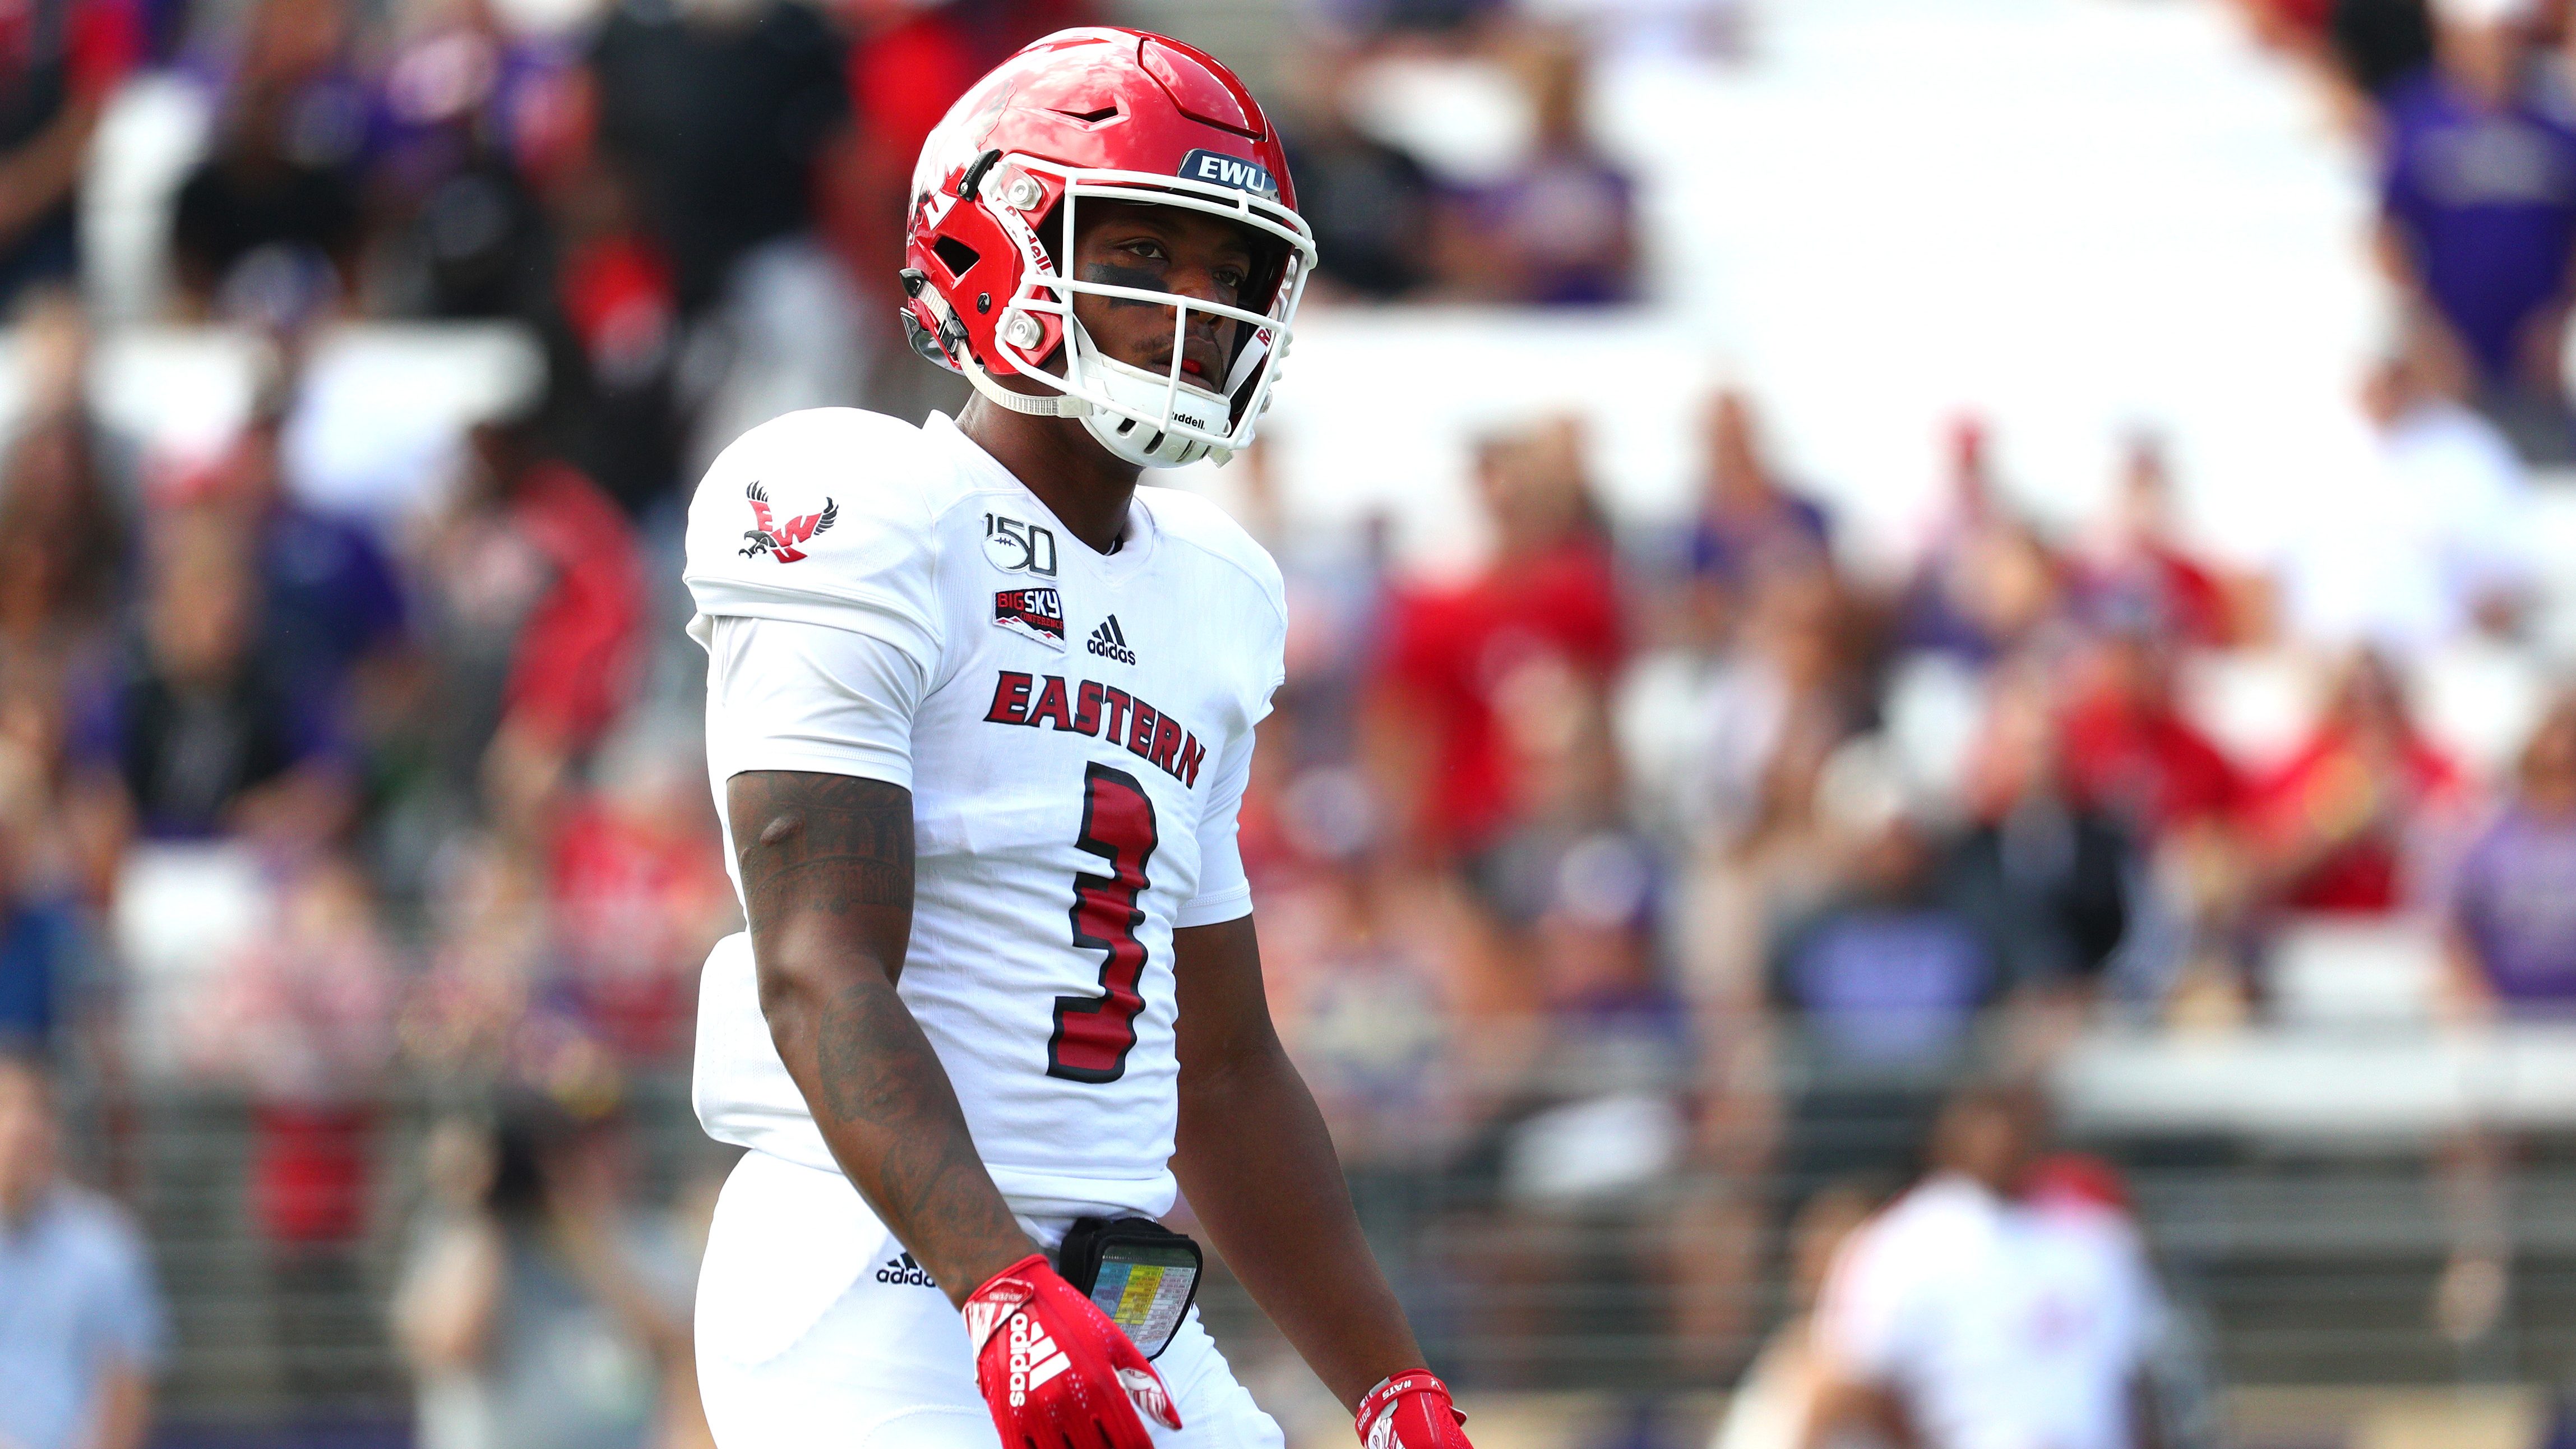 How to Watch EWU vs Jacksonville State Football Online